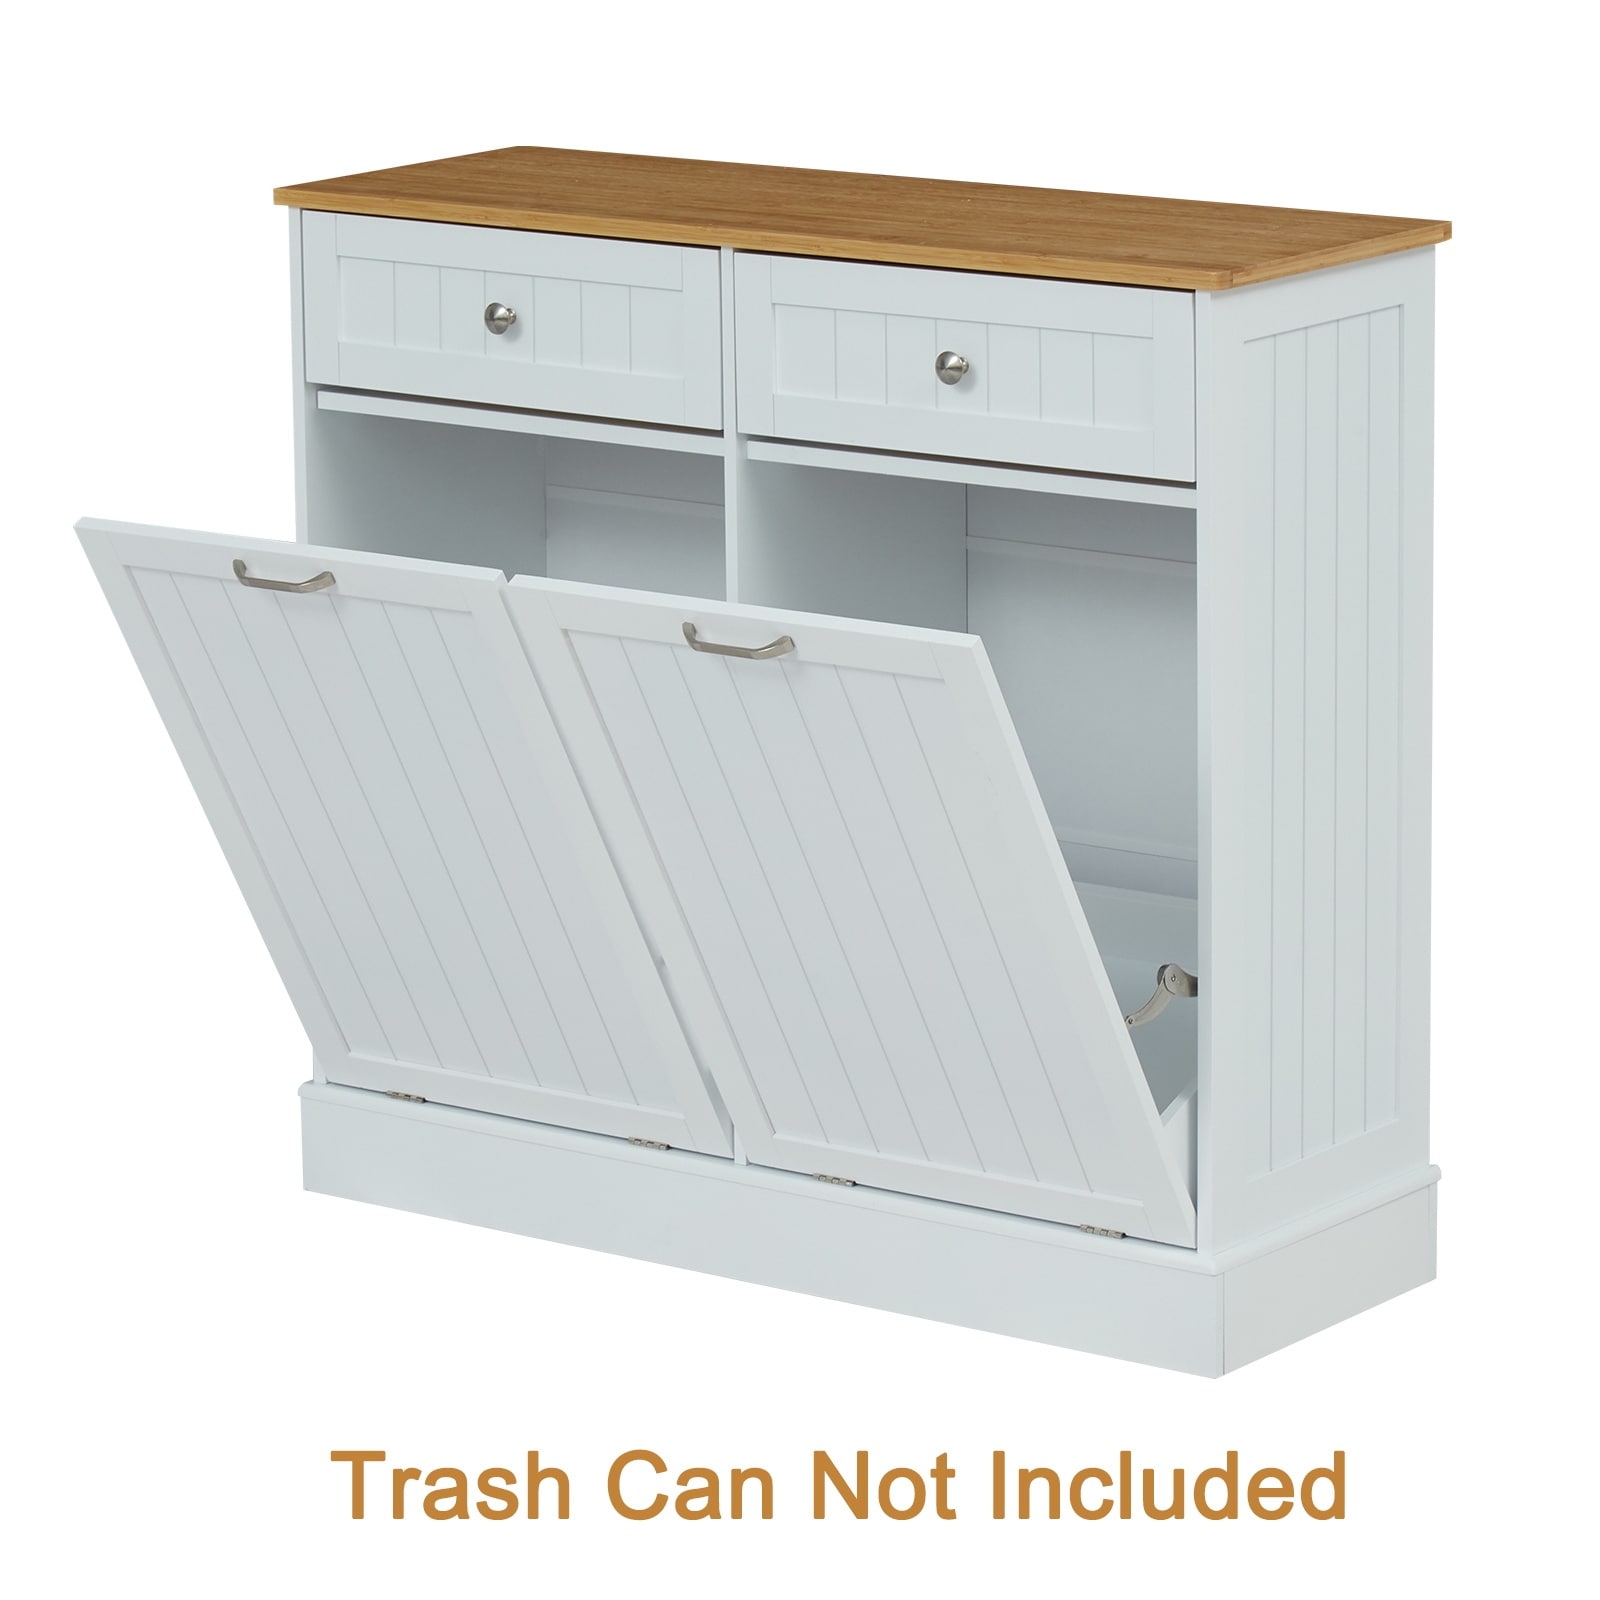 https://ak1.ostkcdn.com/images/products/is/images/direct/b2f765cdf94490b1f3383bcb9c0222f51c5ff710/Kinbor-Tilt-Out-Trash-Cabinet-Wooden-Kitchen-Trash-Bin-Can%2CRecycling-Cabinet-w--Drawer-and-Removable-Bamboo-Cutting-Board%2C-White.jpg